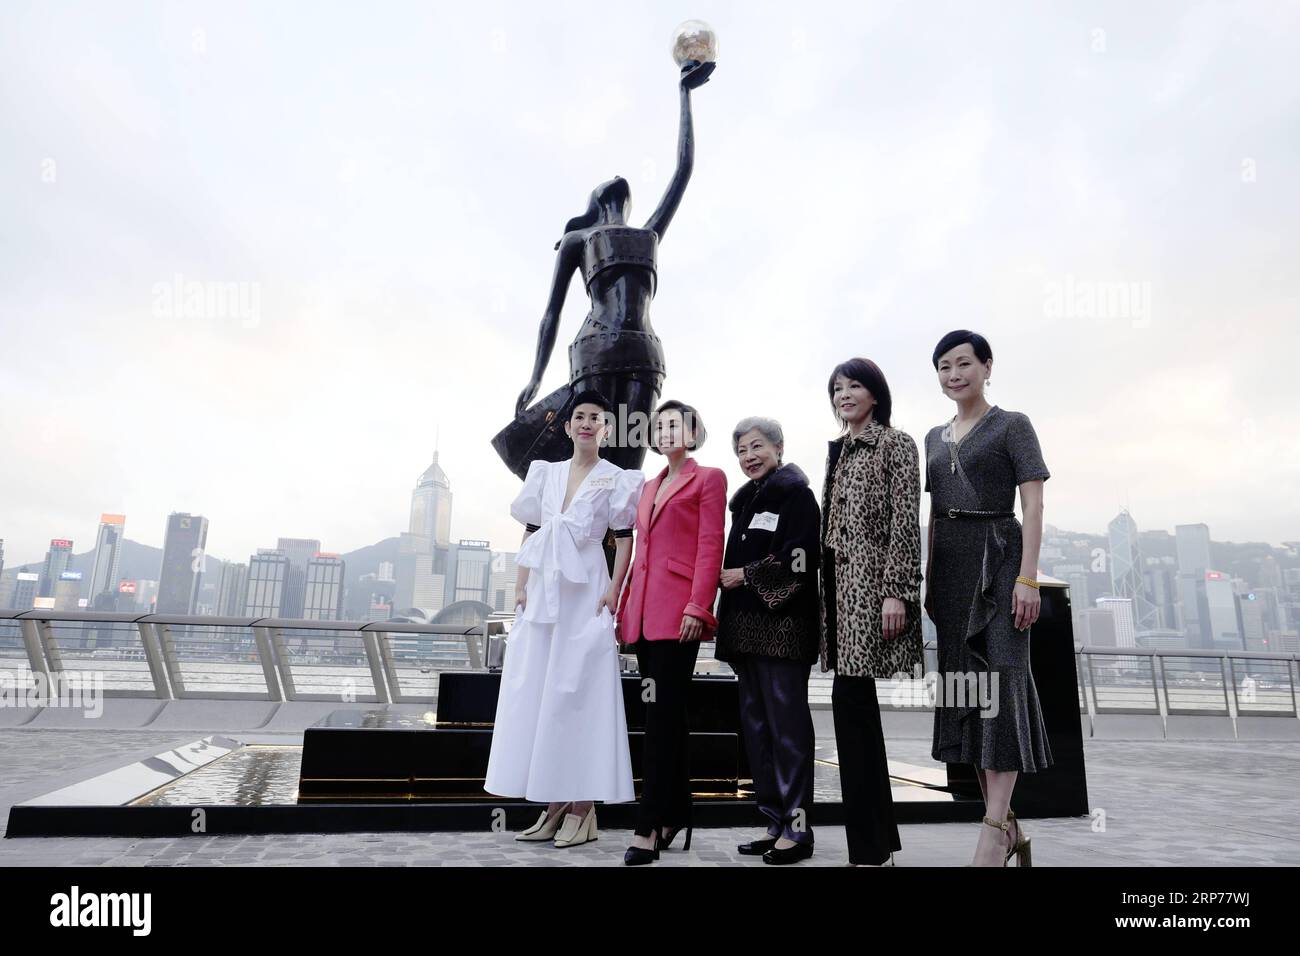 (190131) -- BEIJING, Jan. 31, 2019 (Xinhua) -- Winners of Best Actress at the Hong Kong Film Awards, Sandra Ng, Teresa Mo, Helena Law Lan, Carol Cheng and Cecilia Yip (L-R) pose for photos on the Avenue of Stars in Hong Kong, south China, Jan. 30, 2019. The Avenue of Stars, one of the most popular attractions in China s Hong Kong Special Administrative Region, on Wednesday held the reopening ceremony after a three-year revitalization work. (Xinhua/Wang Shen) XINHUA PHOTOS OF THE DAY PUBLICATIONxNOTxINxCHN Stock Photo